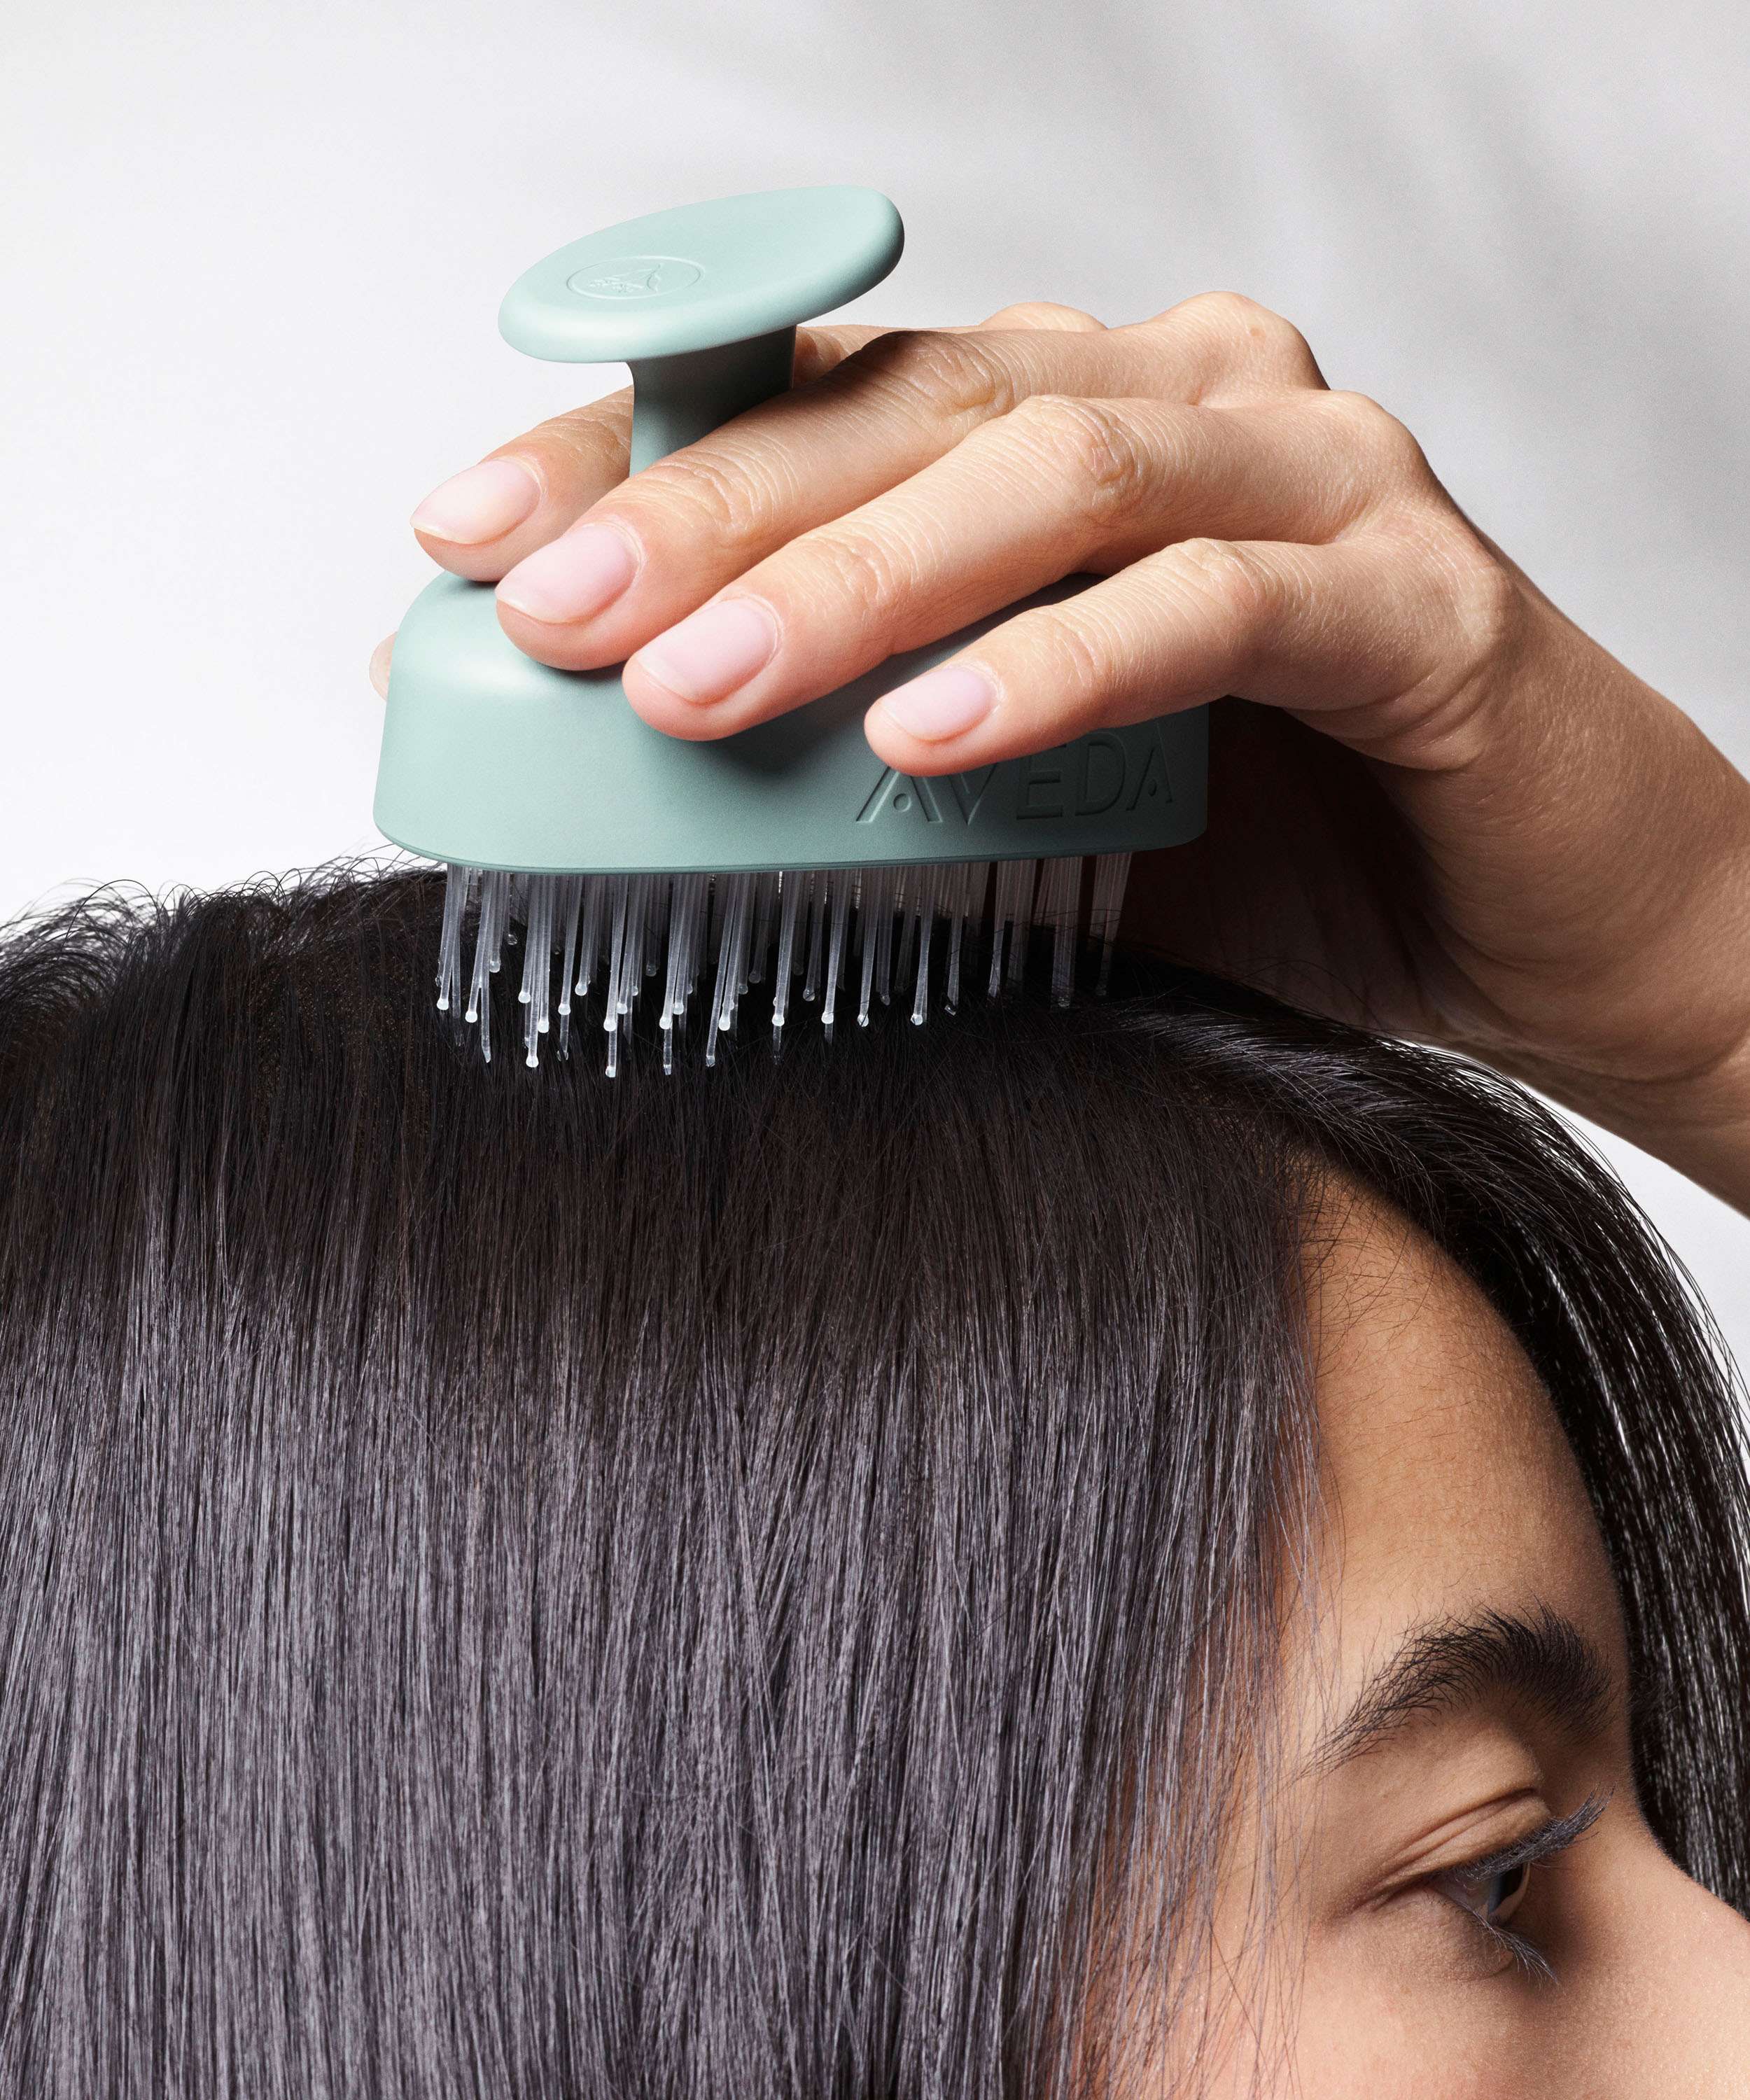 How to Take Better Care of Your Scalp